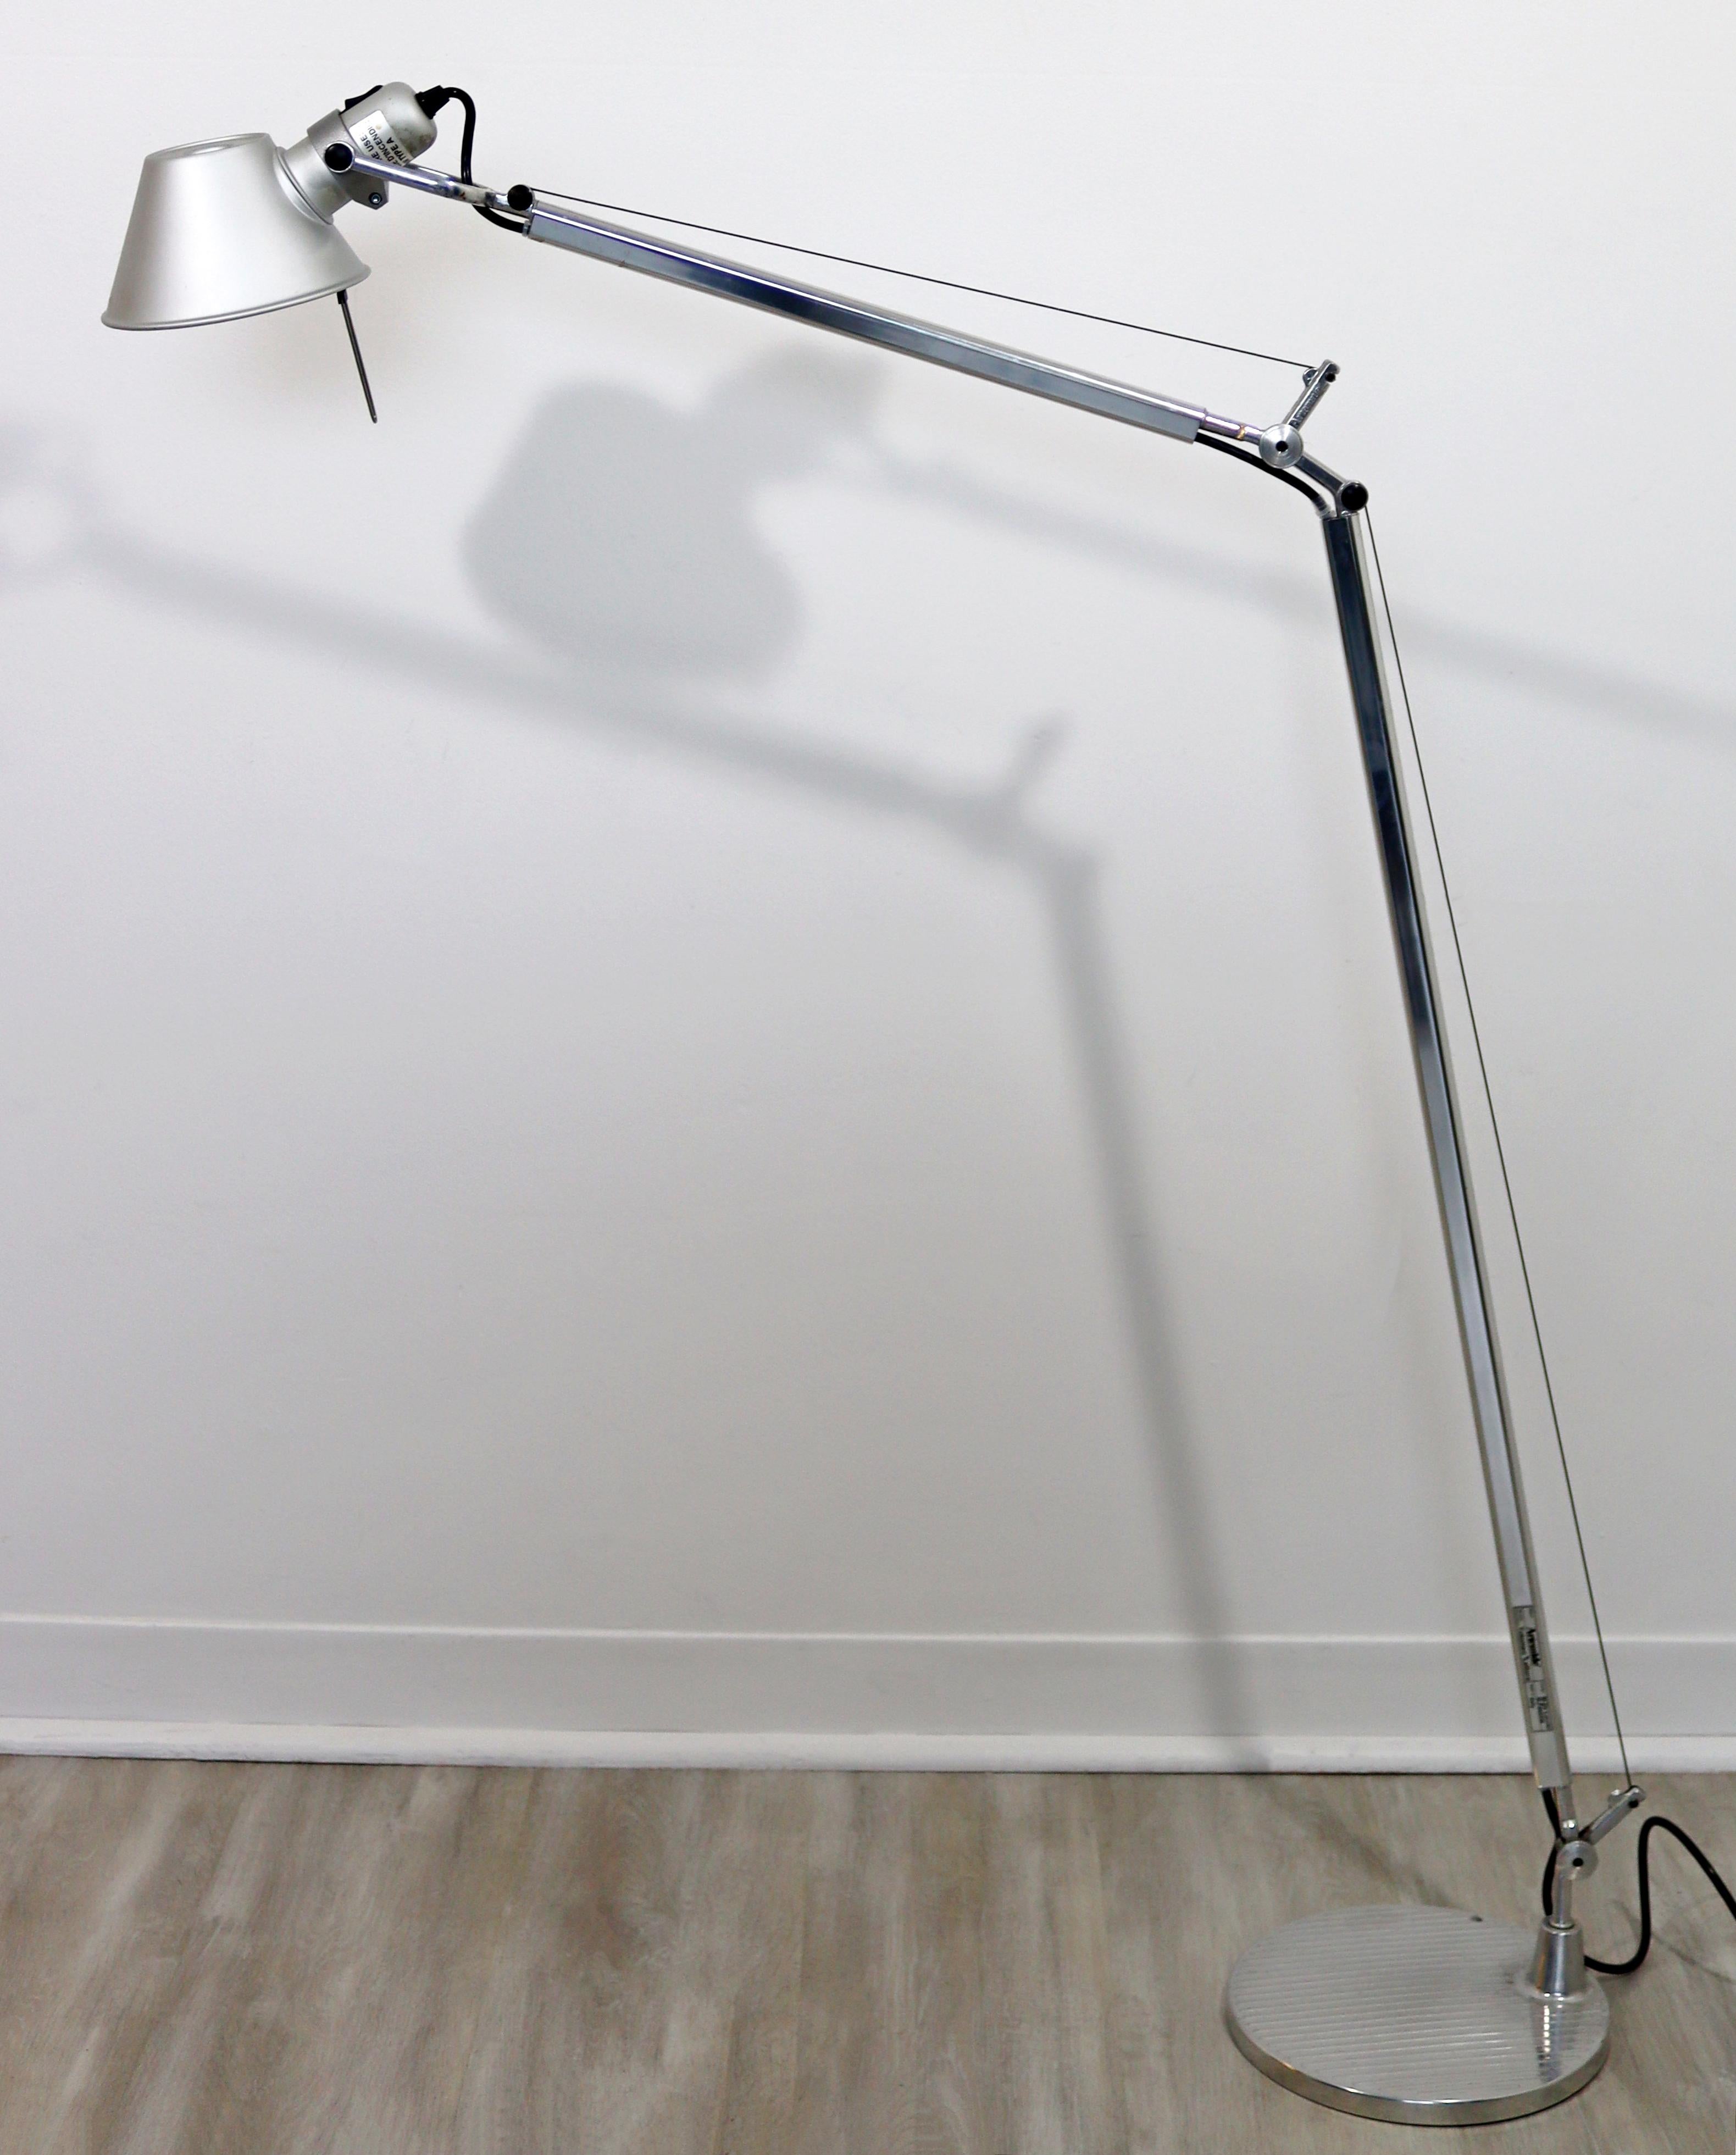 For your consideration is a gorgeous, gray metal, reading floor lamp, by Michele De Lucchi & Giancarlo Fassina, made in Itay. In excellent condition. The dimensions are 9